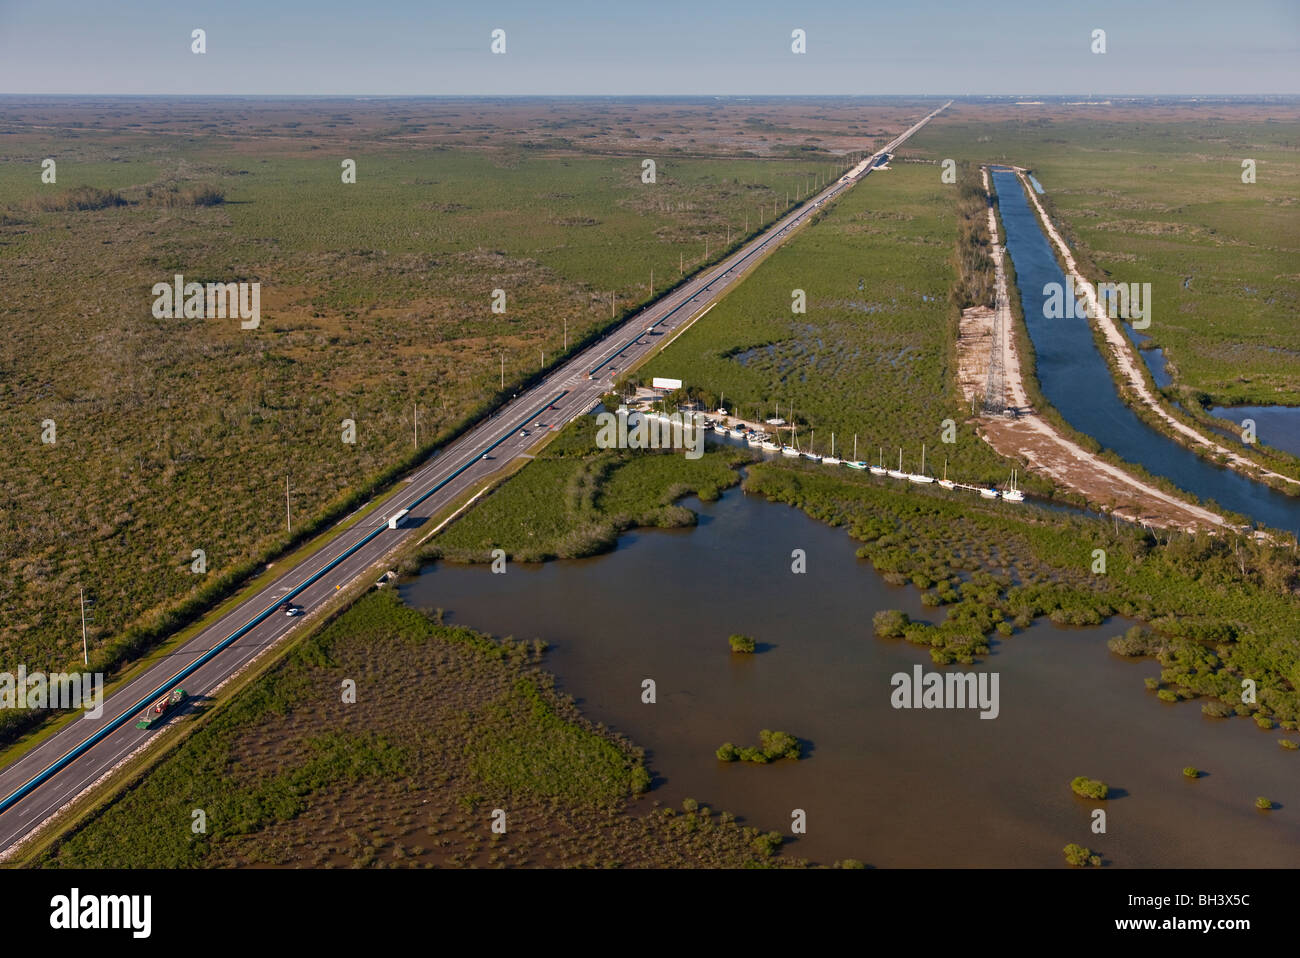 Aerial Showing Route 1 in Southern Florida Stock Photo